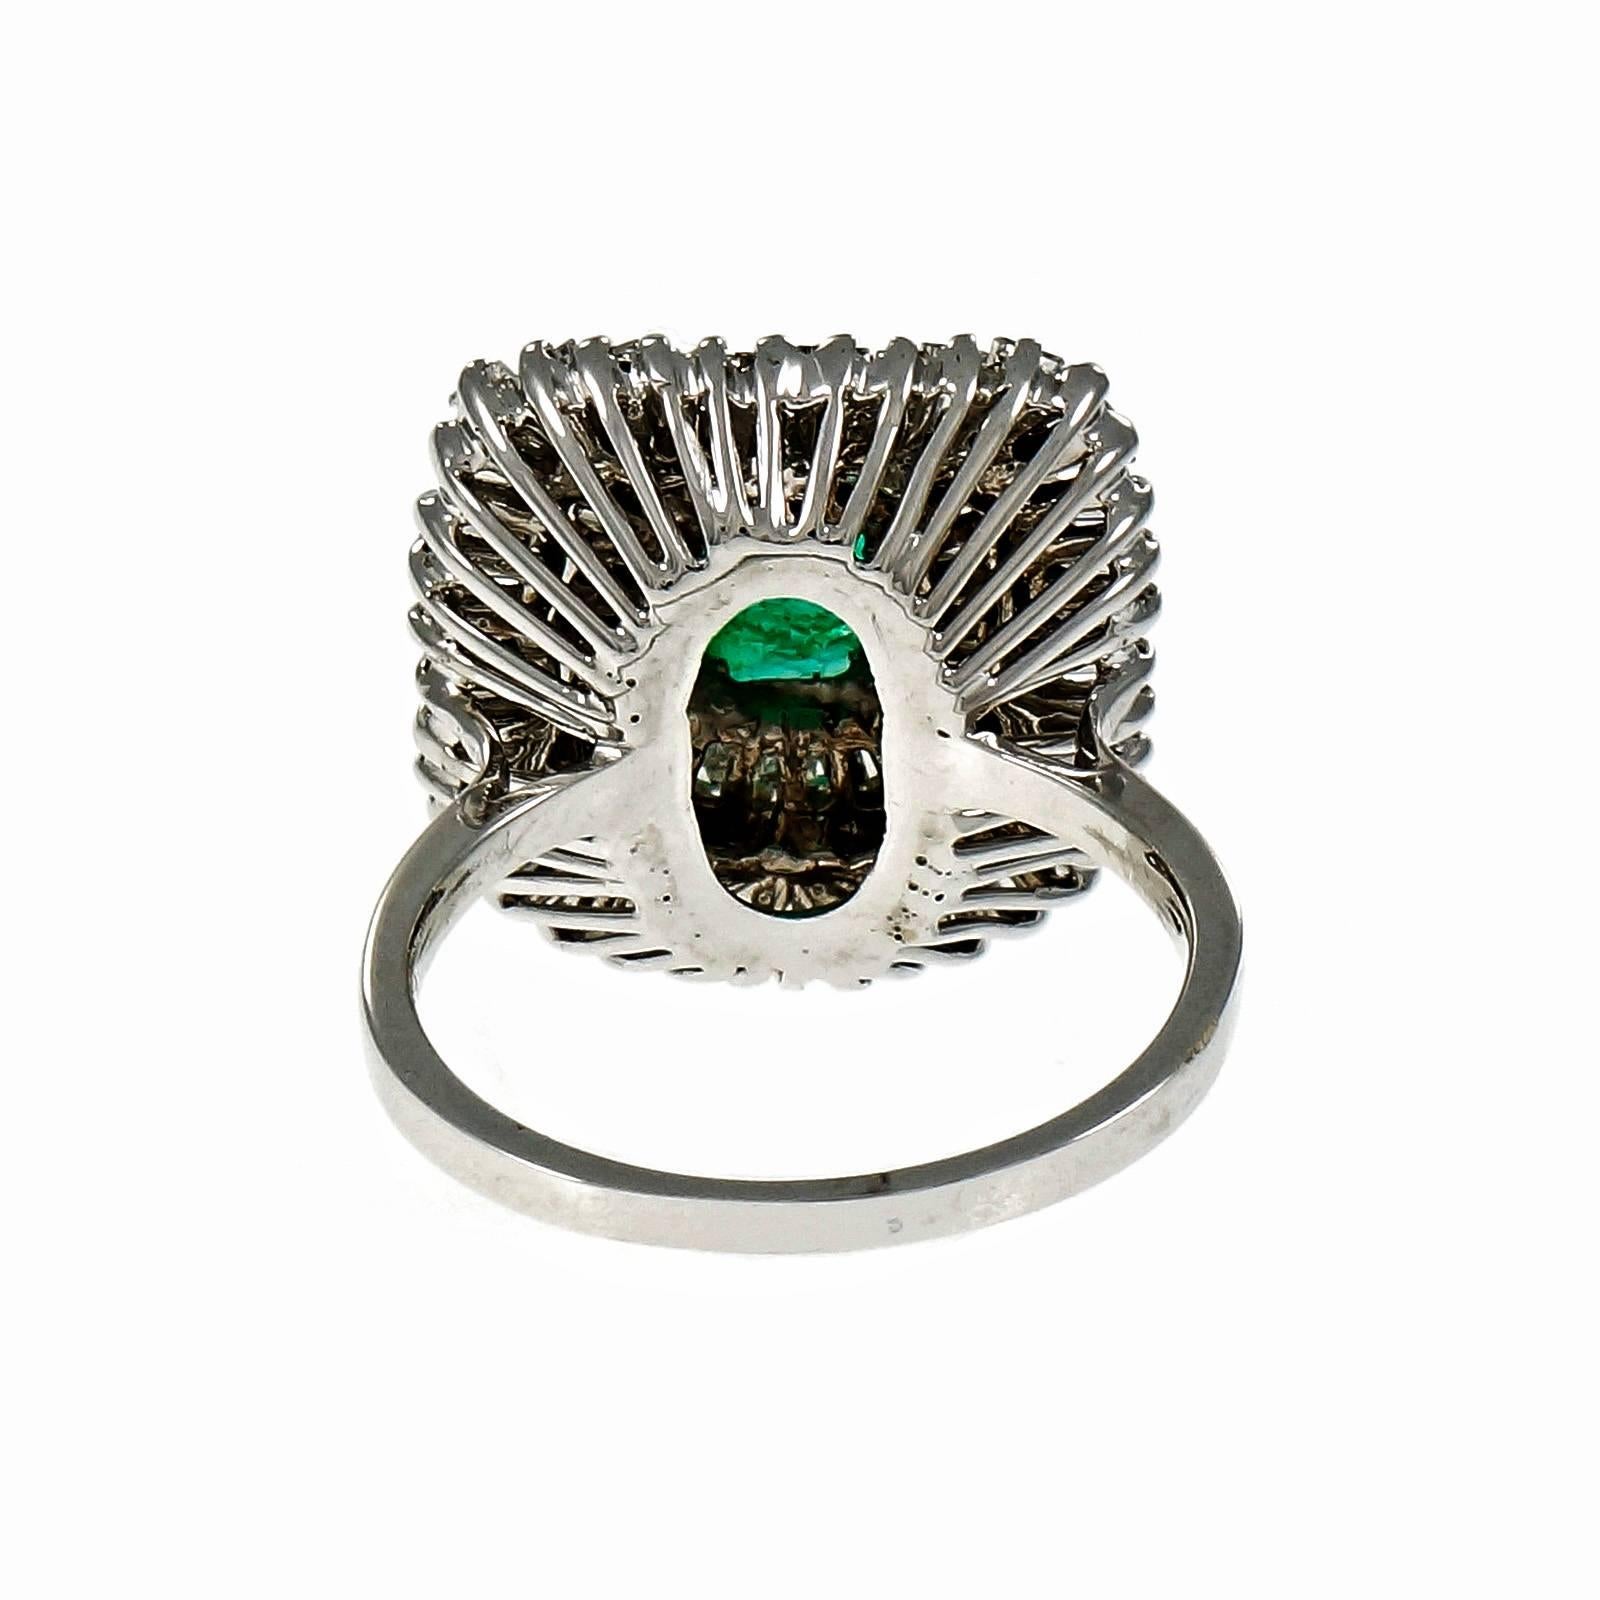 1960-1970 Ballerina style ring with baguette diamonds and a GIA certified bright green Emerald. Natural Emerald clarity enhanced only.

1 green Emerald cut Emerald, approx. total weight 2.31cts, 8.80 x 6.73 x 4.22mm GIA cert# 2175585963
68